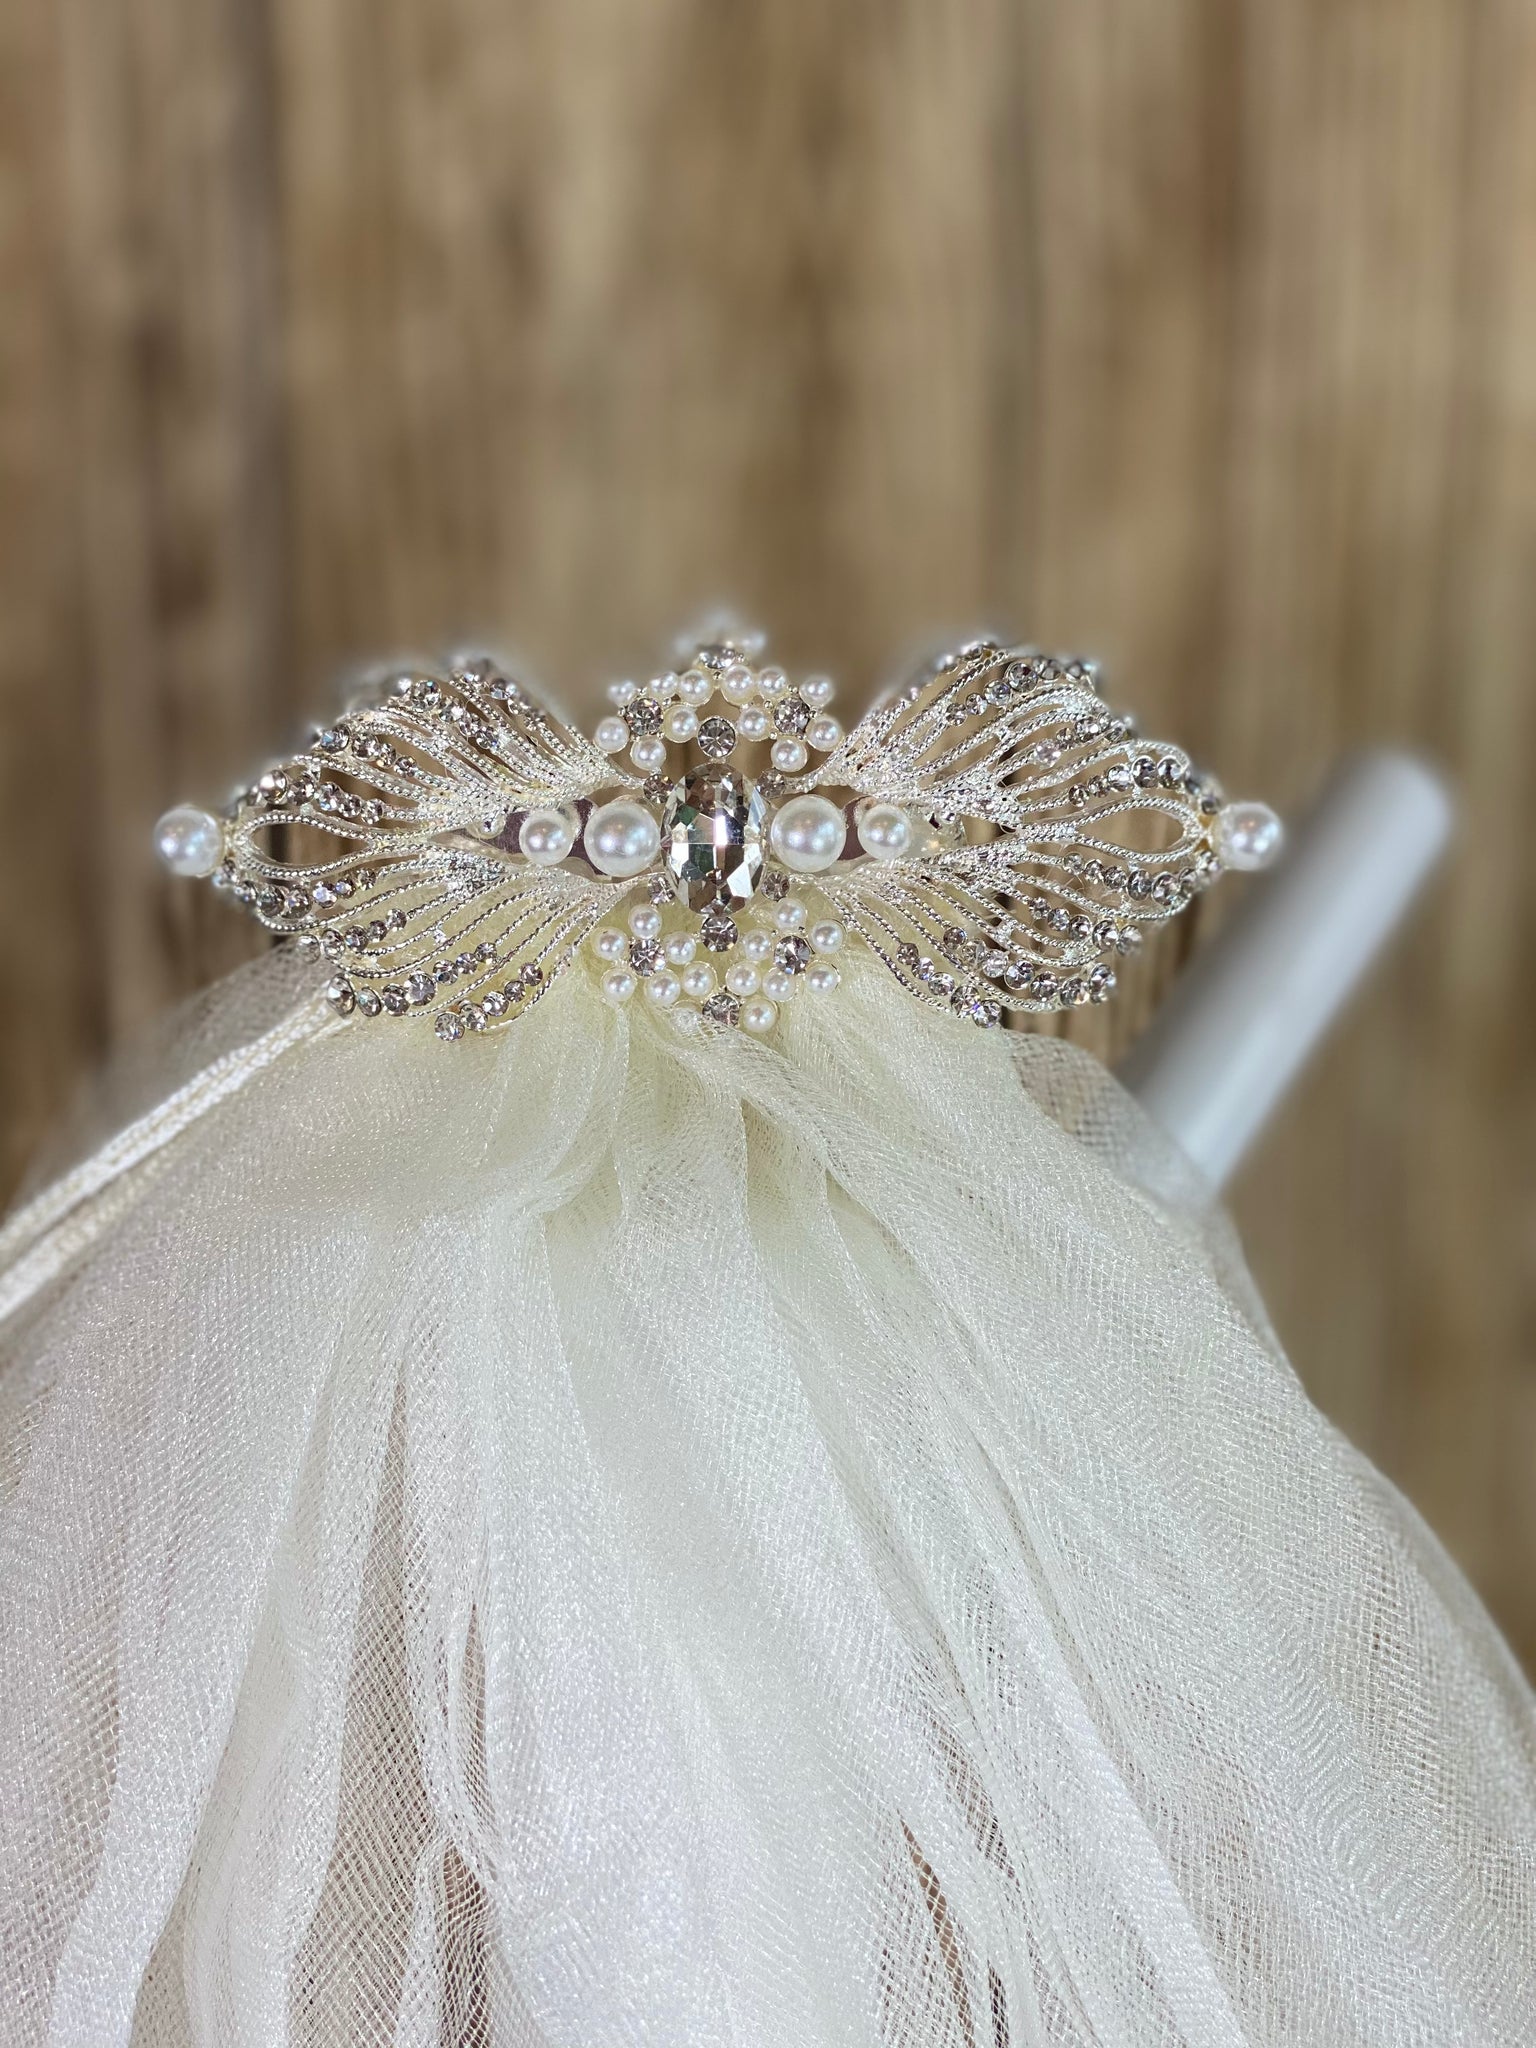 White - Elegant First Communion Veil on Decorative Comb  Elegant soft 2 layer tulle veil with delicate hand stitched braided satin trim around the edge and handmade decorative metal comb tiara with pearls and rhinestone detailing.  This double layered veil reaches approximately 21" long. Veil has 1.5" long, 2" wide, metal comb to secure it in place. 